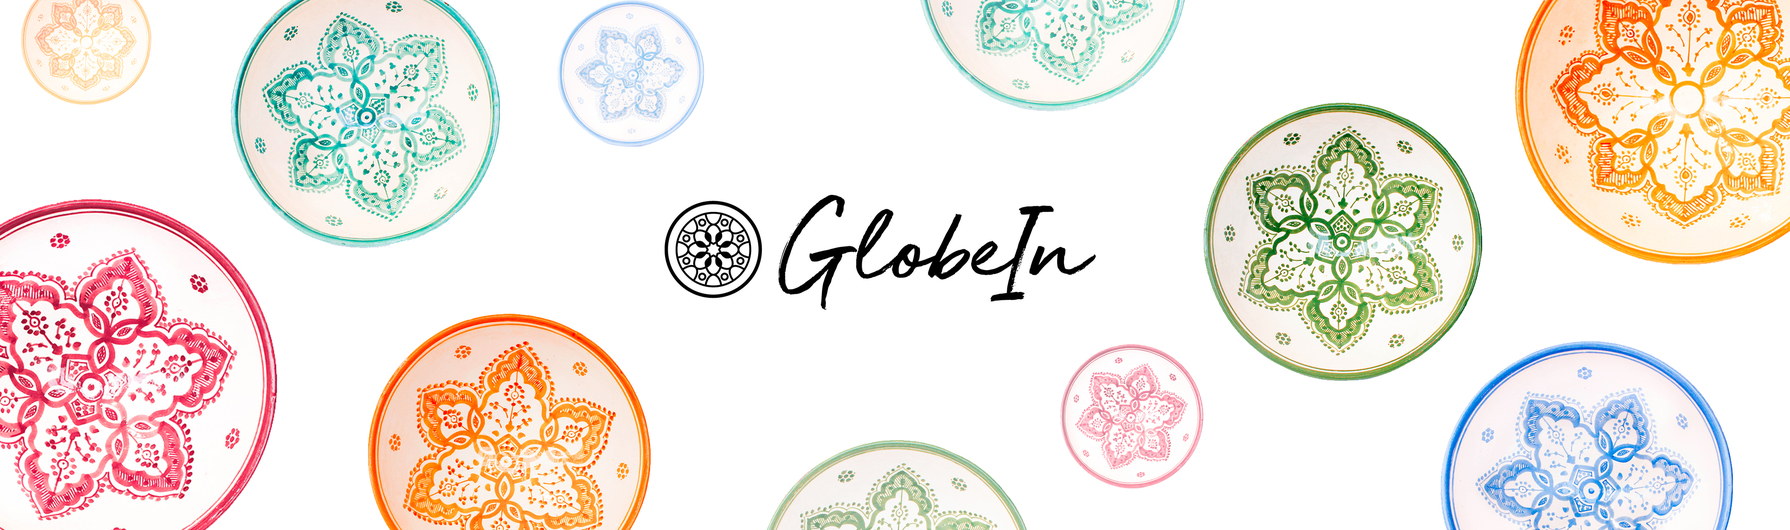 GlobeIn Black Friday Deal – 70% Off Your First Box!